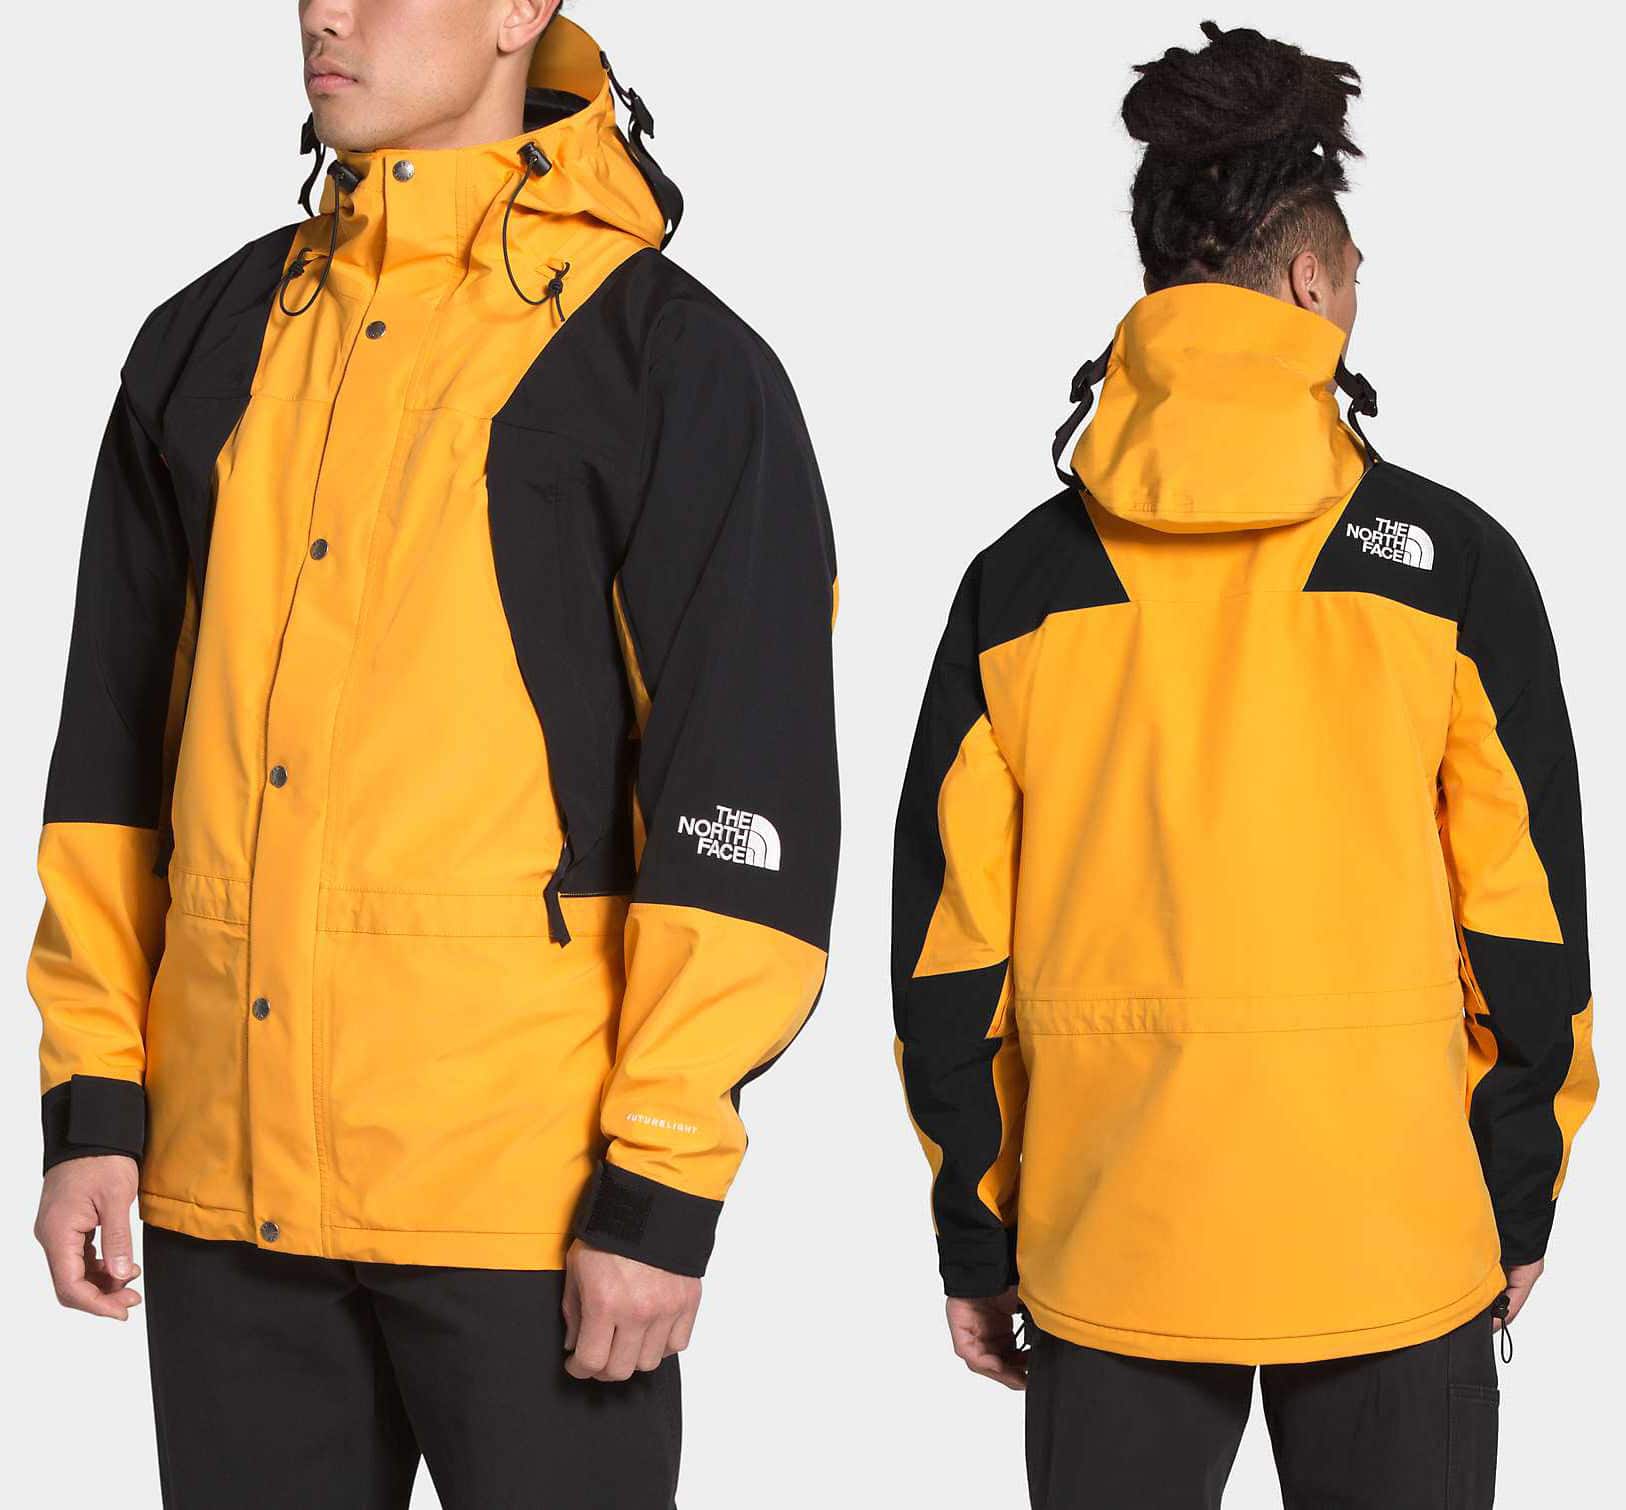 Considered a streetwear icon, the 1994 Retro Mountain Light rain jacket has been updated with FutureLight fabric technology, offering top-level breathability and waterproofing